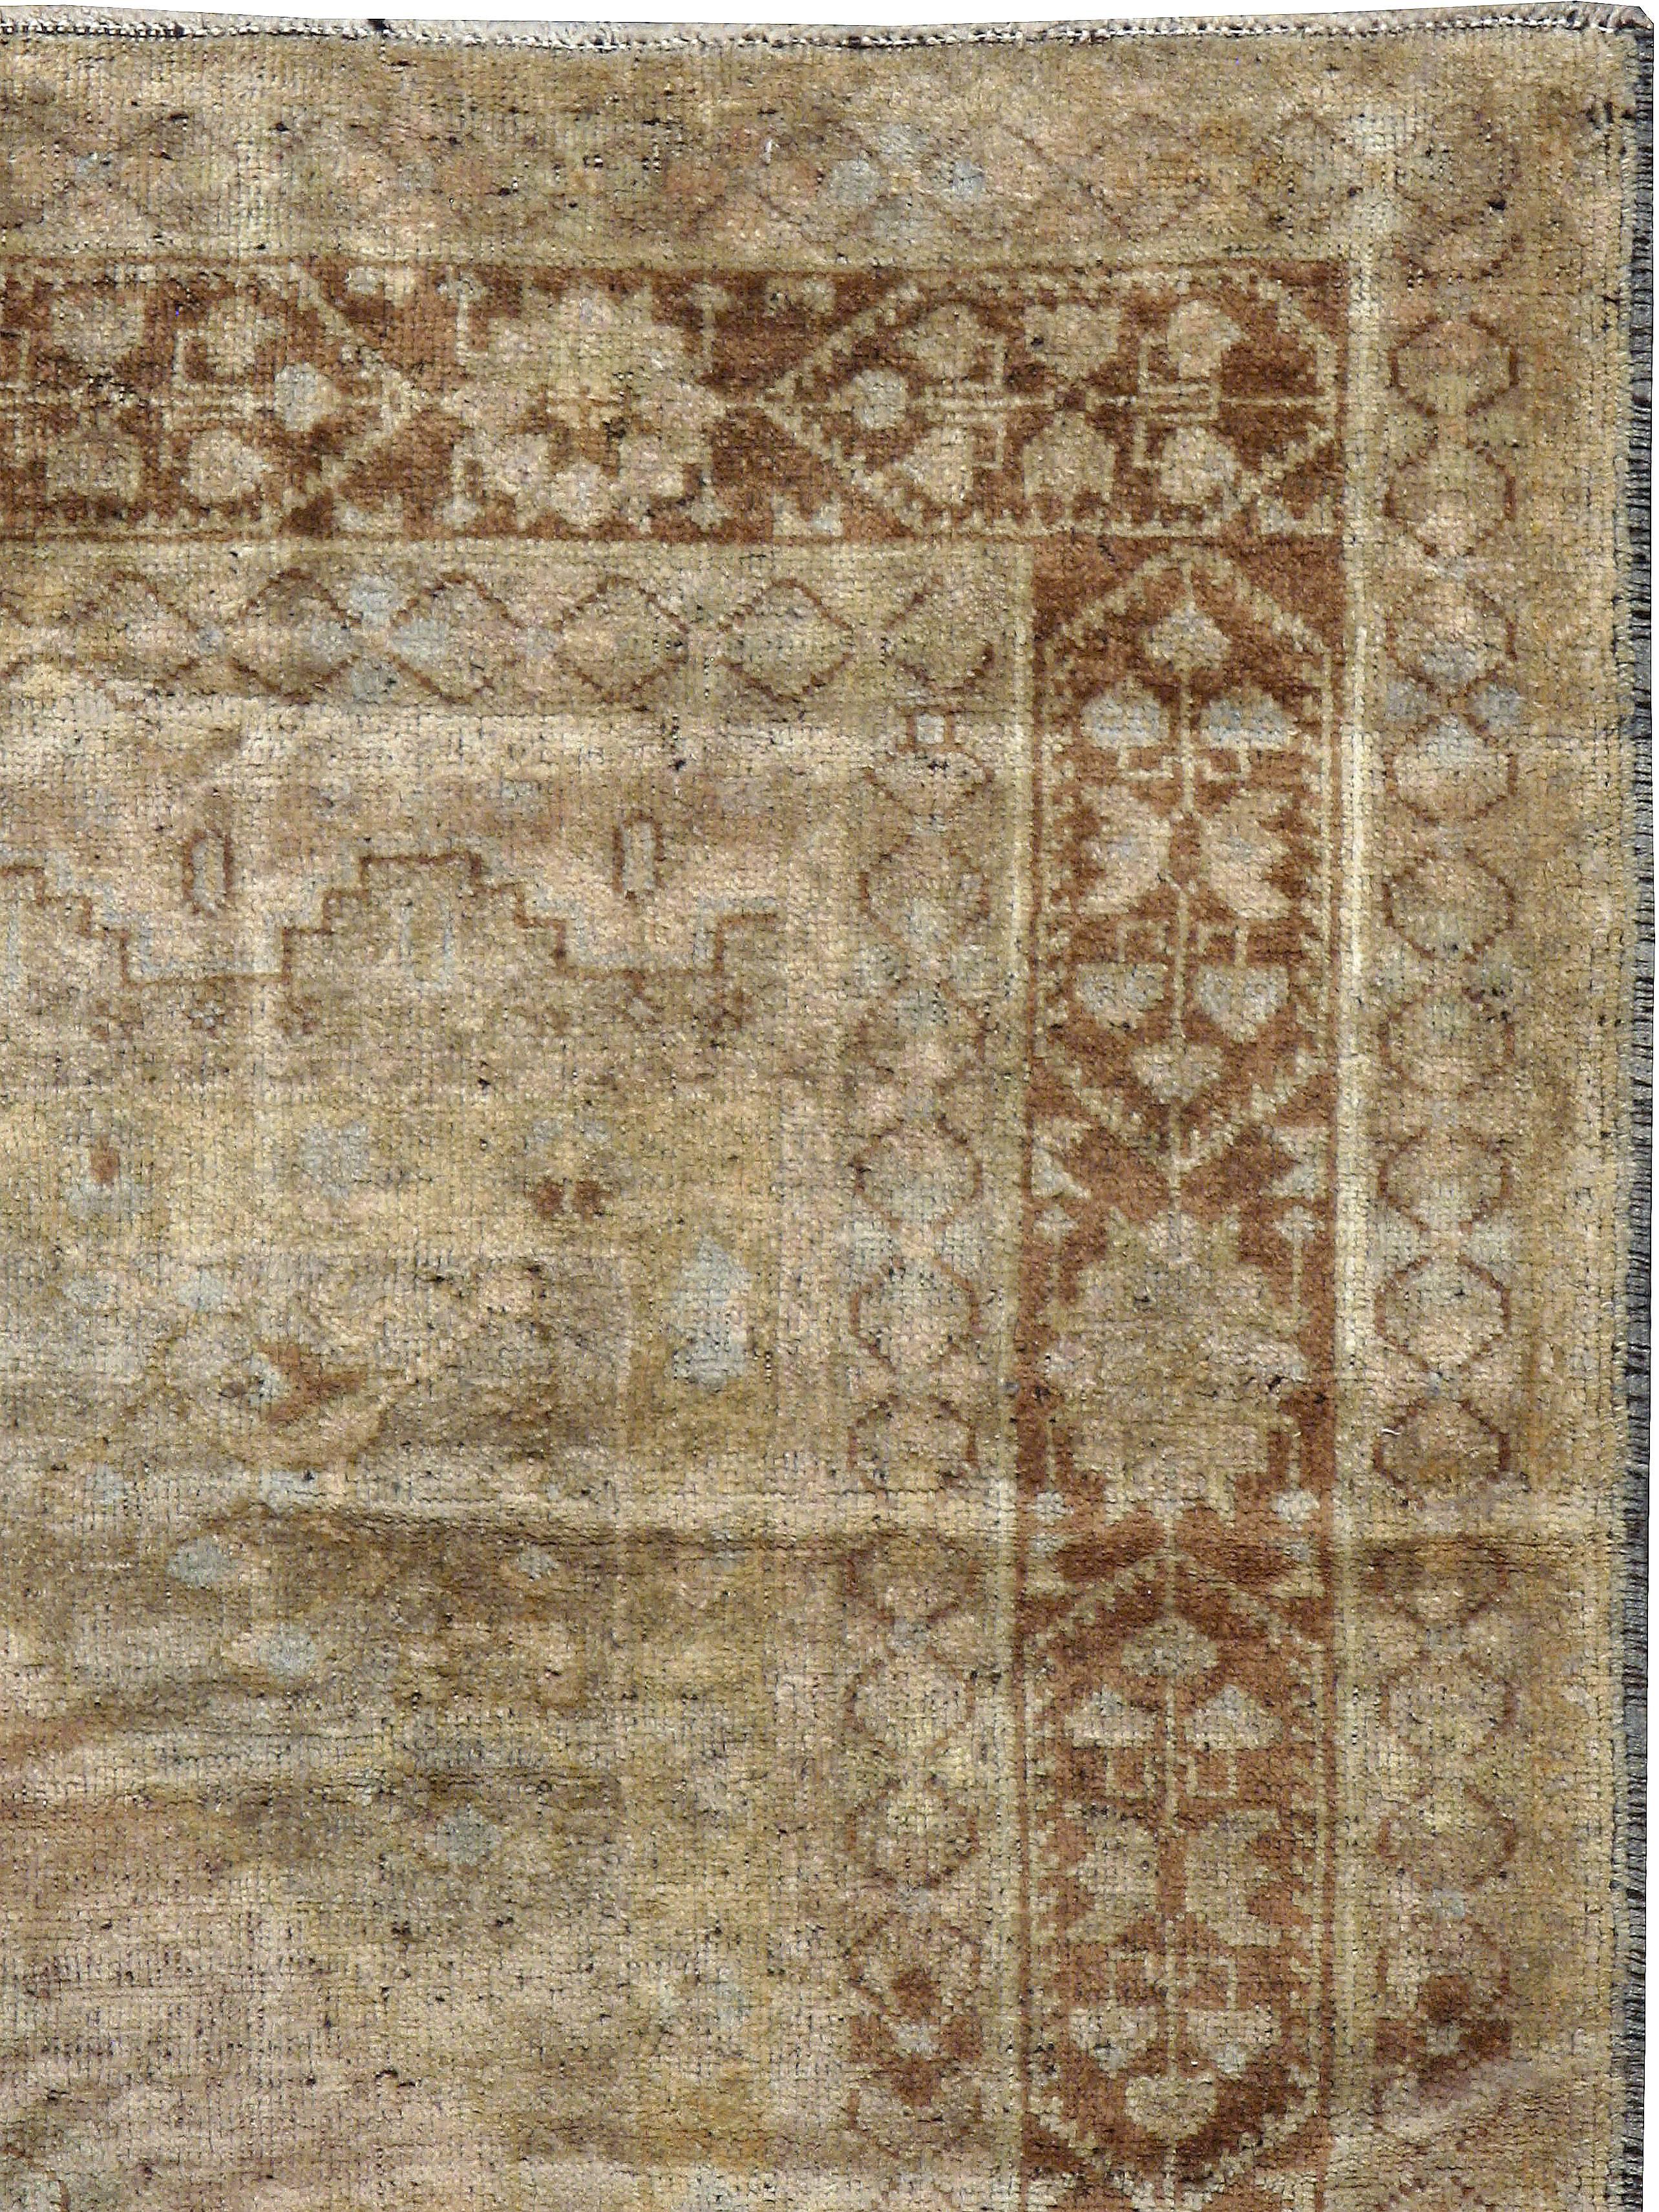 An antique Turkish Oushak carpet from the second quarter of the 20th century.